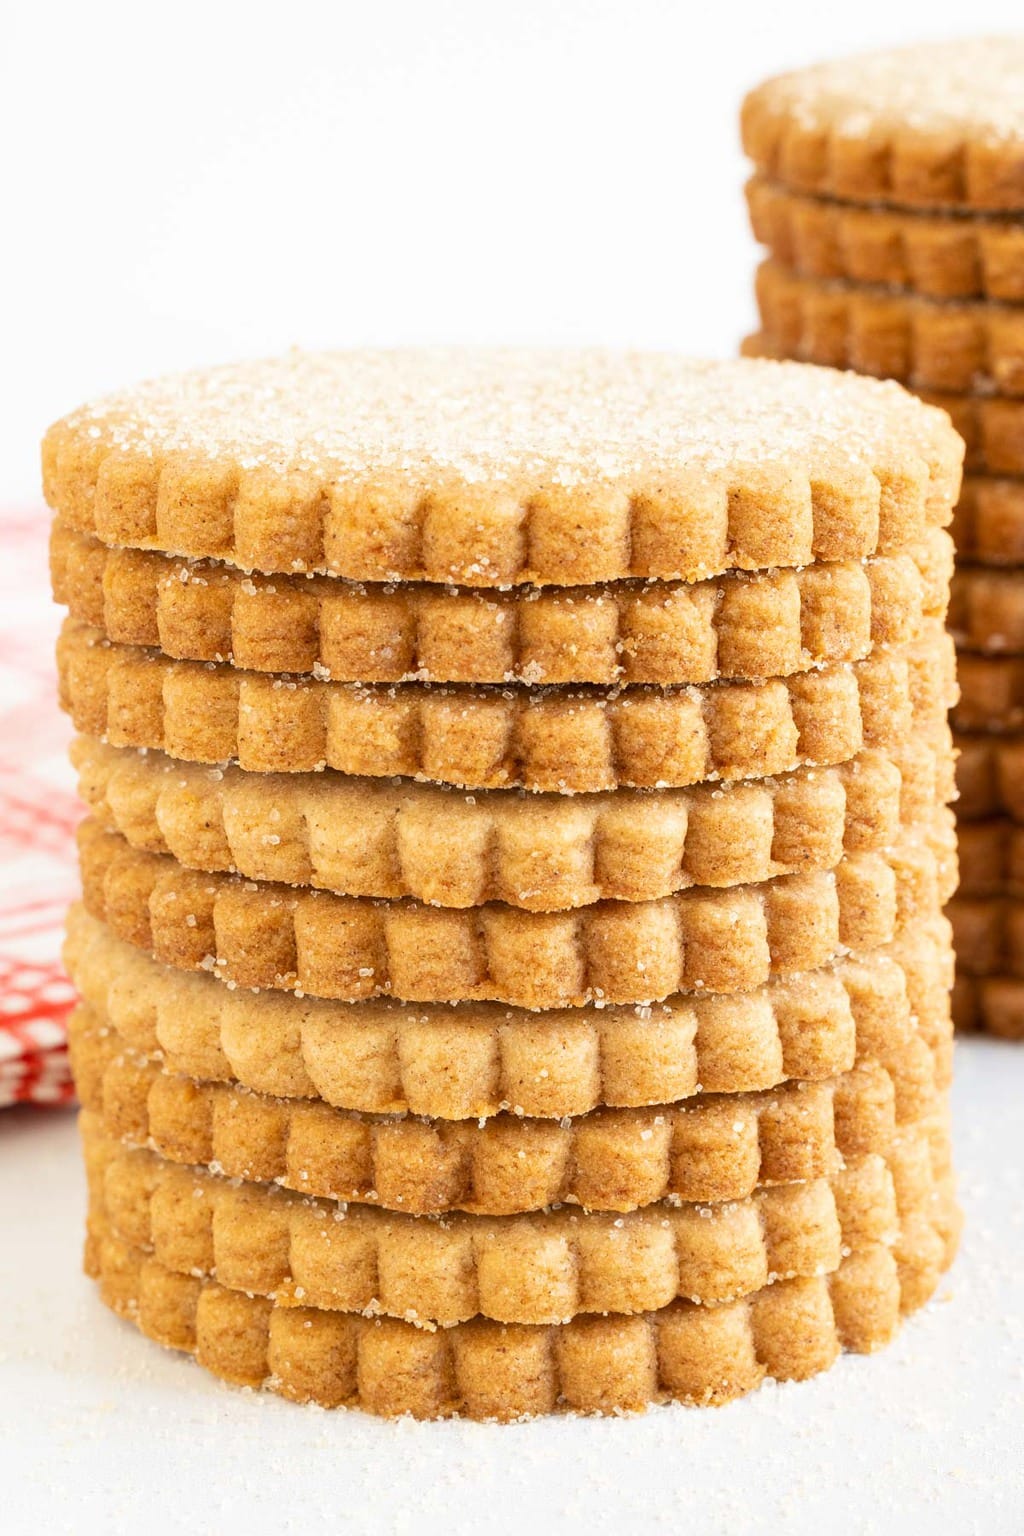 Vertical extreme closeup photo of a stack of Mexican Sugar Cinnamon Shortbread cookies.